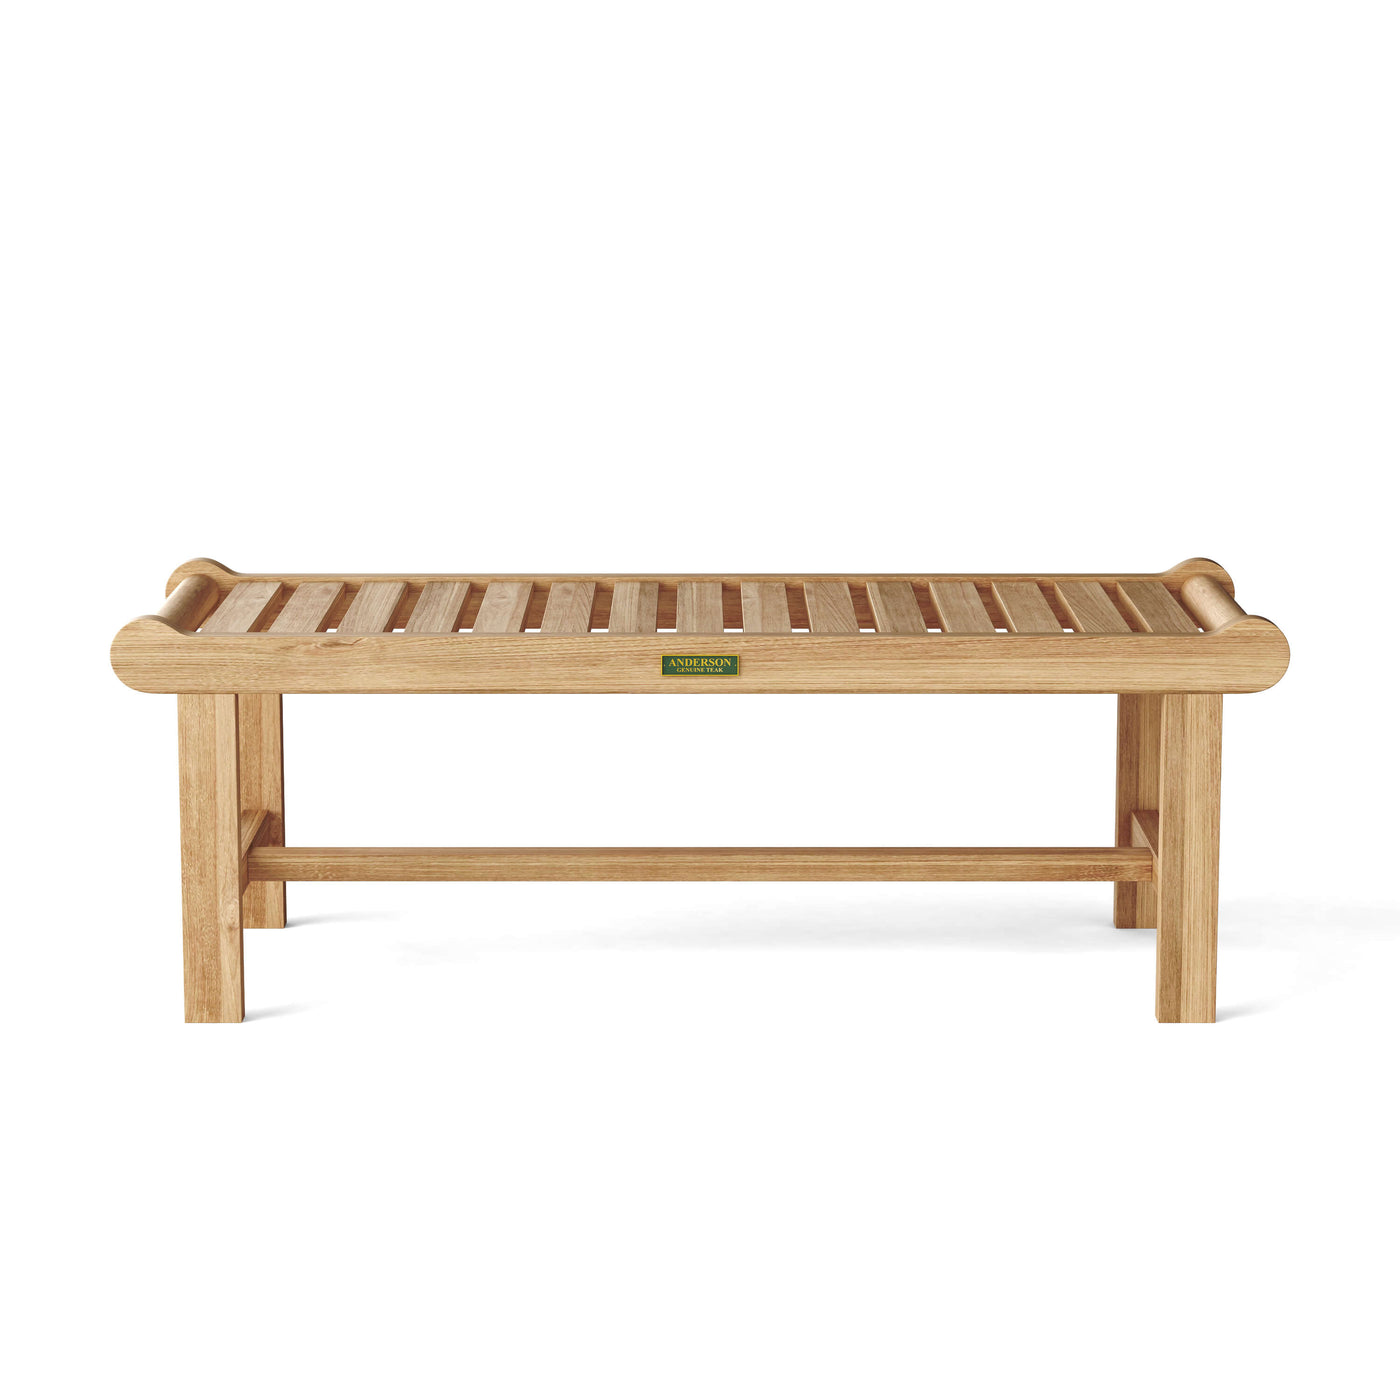 Cambridge 48" Backless Bench